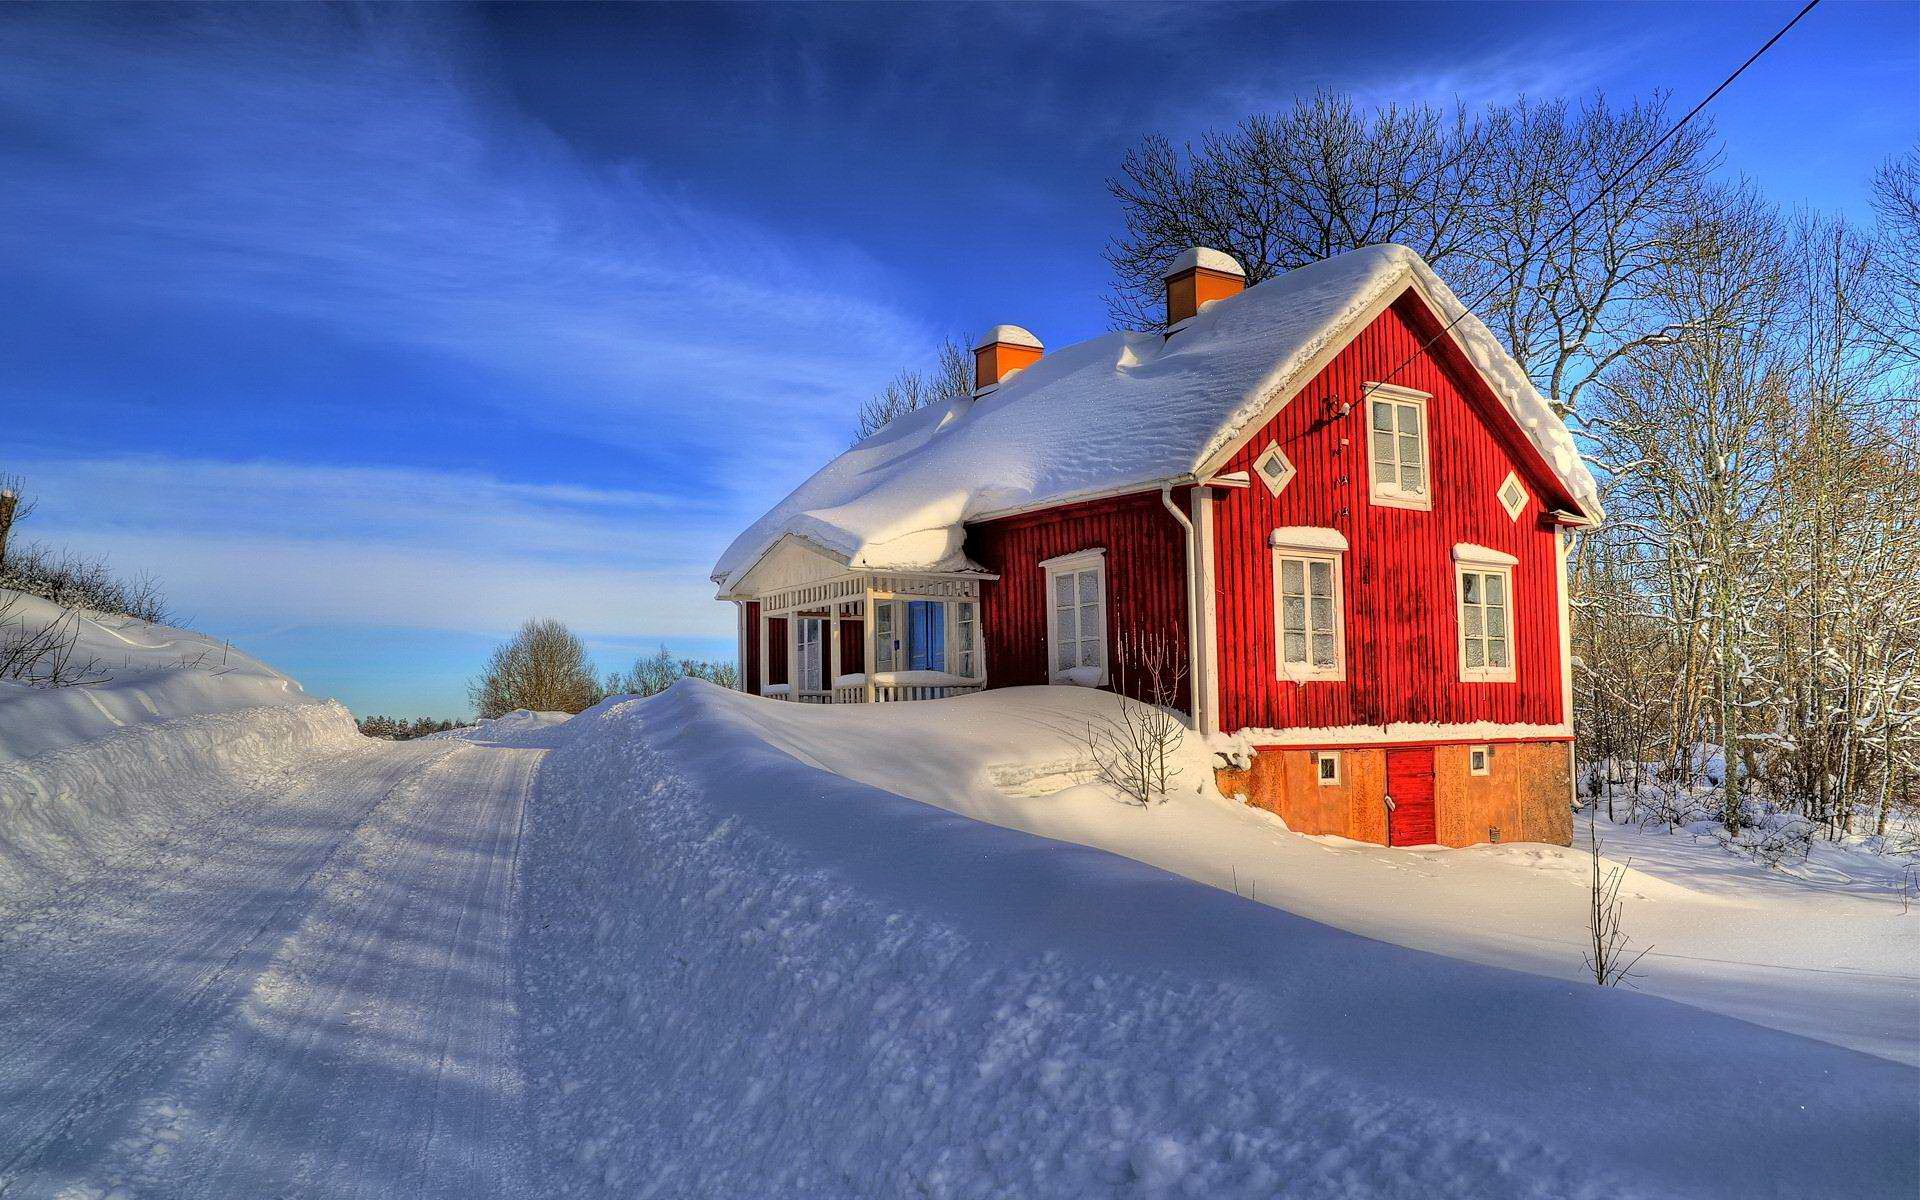 sweden, Road, Snow, Sky, Houses, Blue, Winter, Pure, Fantastic, Enchanting, Magic, White, Beautiful, Cold, House, Icy, Farm, Landscape, Nature, Weather, Awesome, Ice Wallpaper